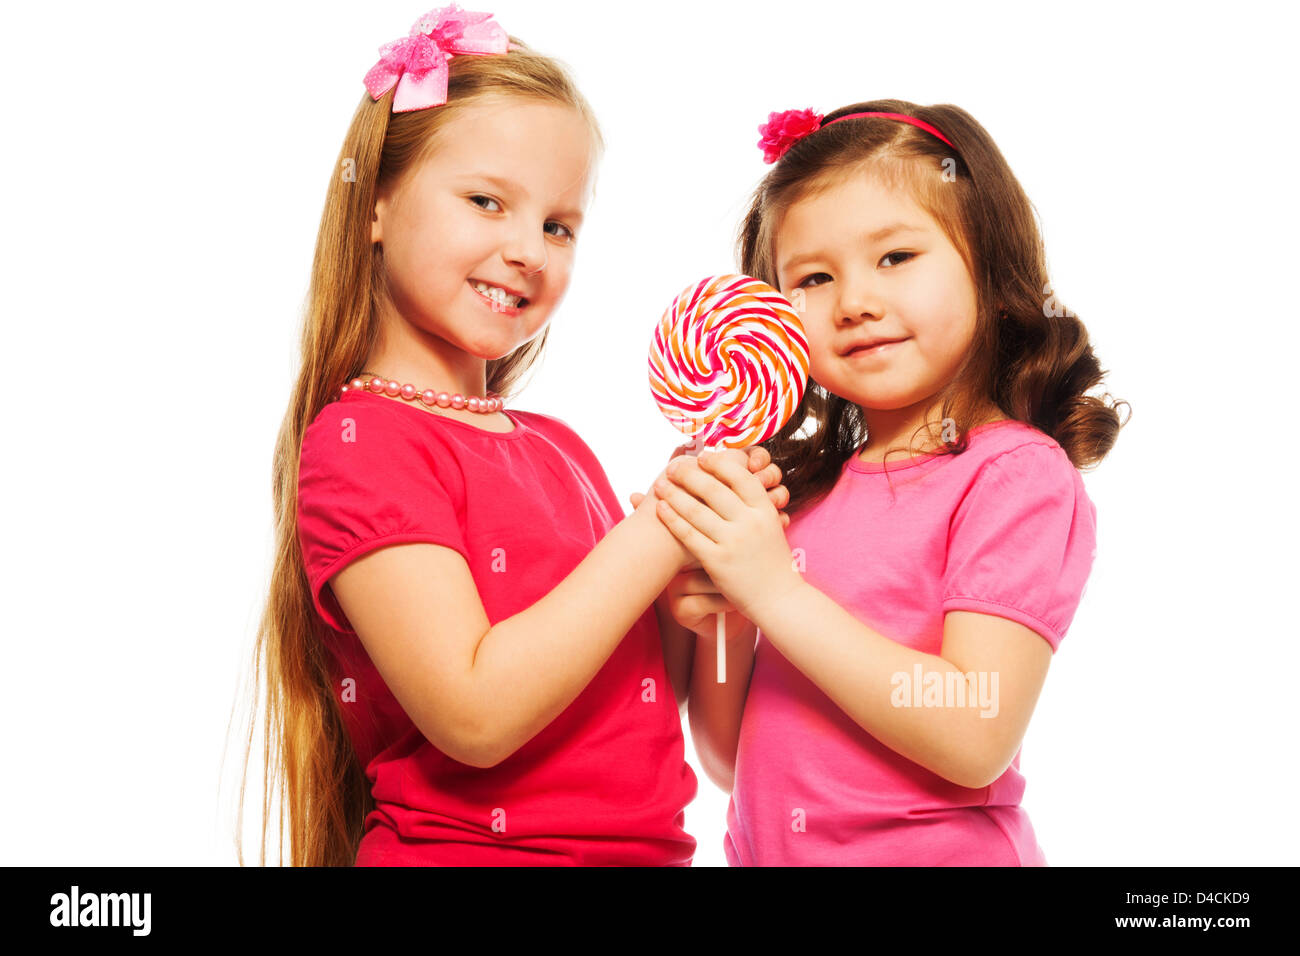 Two girls six seven years old holding lollipop and smiling, isolated on white Stock Photo